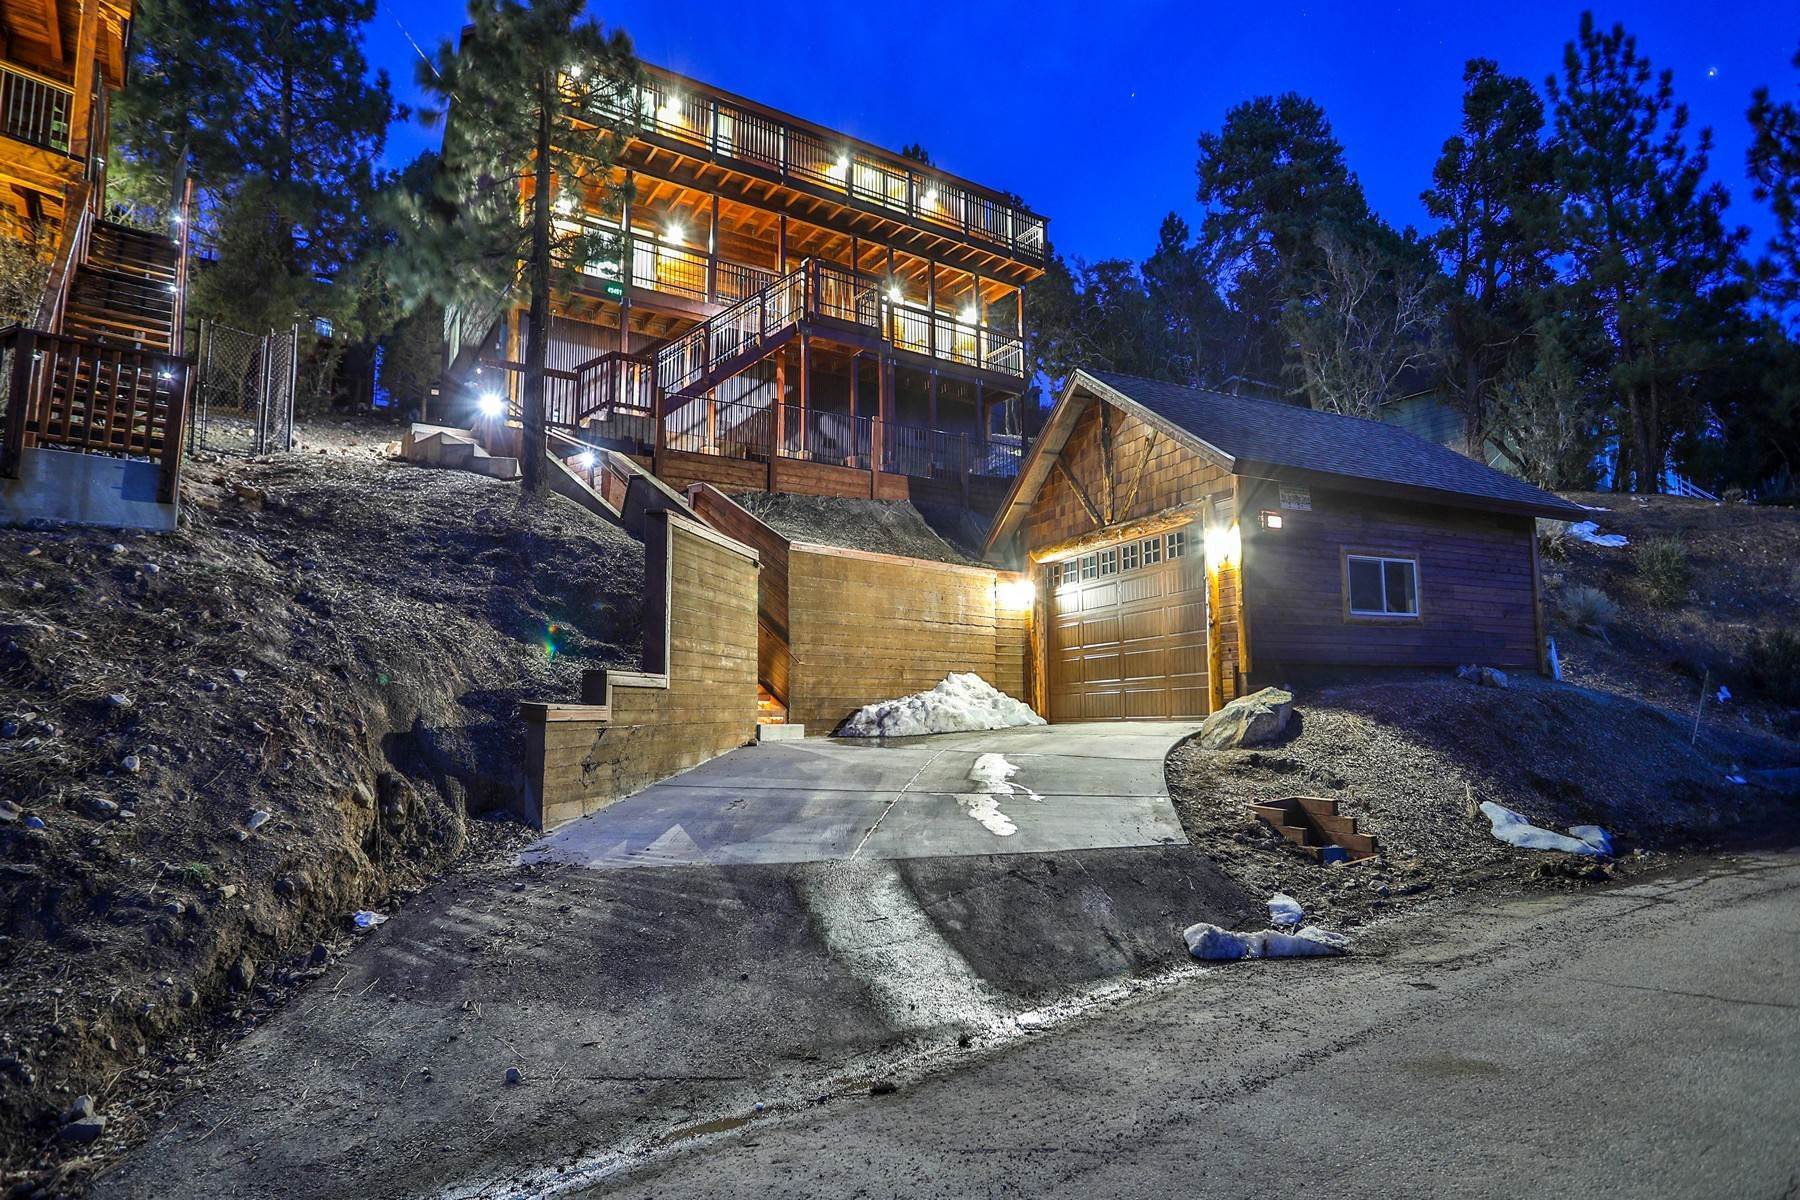 Single Family Homes for Sale at 43451 Sheephorn Road, Big Bear Lake, California 92315 43451 Sheephorn Road Big Bear Lake, California 92315 United States